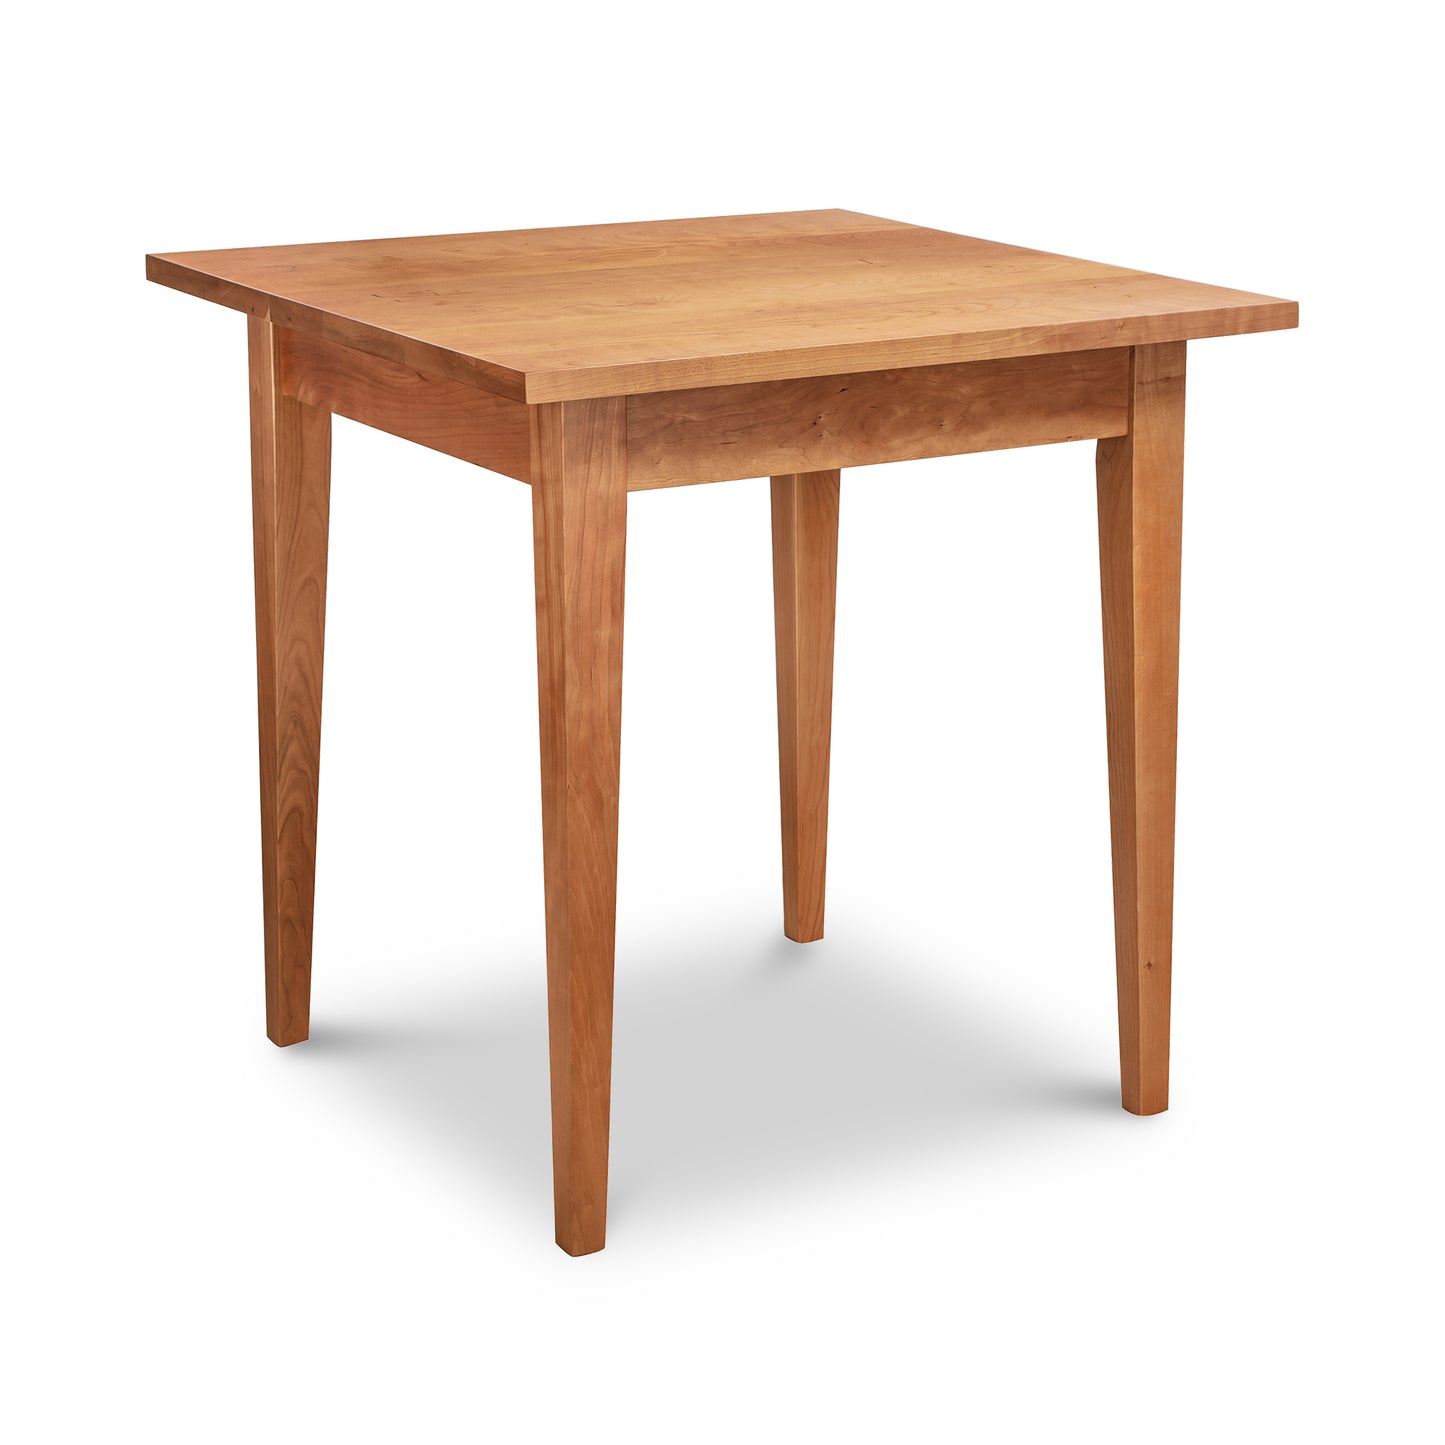 A Classic Shaker Square Dining Table from Lyndon Furniture with legs on a white background, crafted from solid hardwoods using traditional joinery techniques.